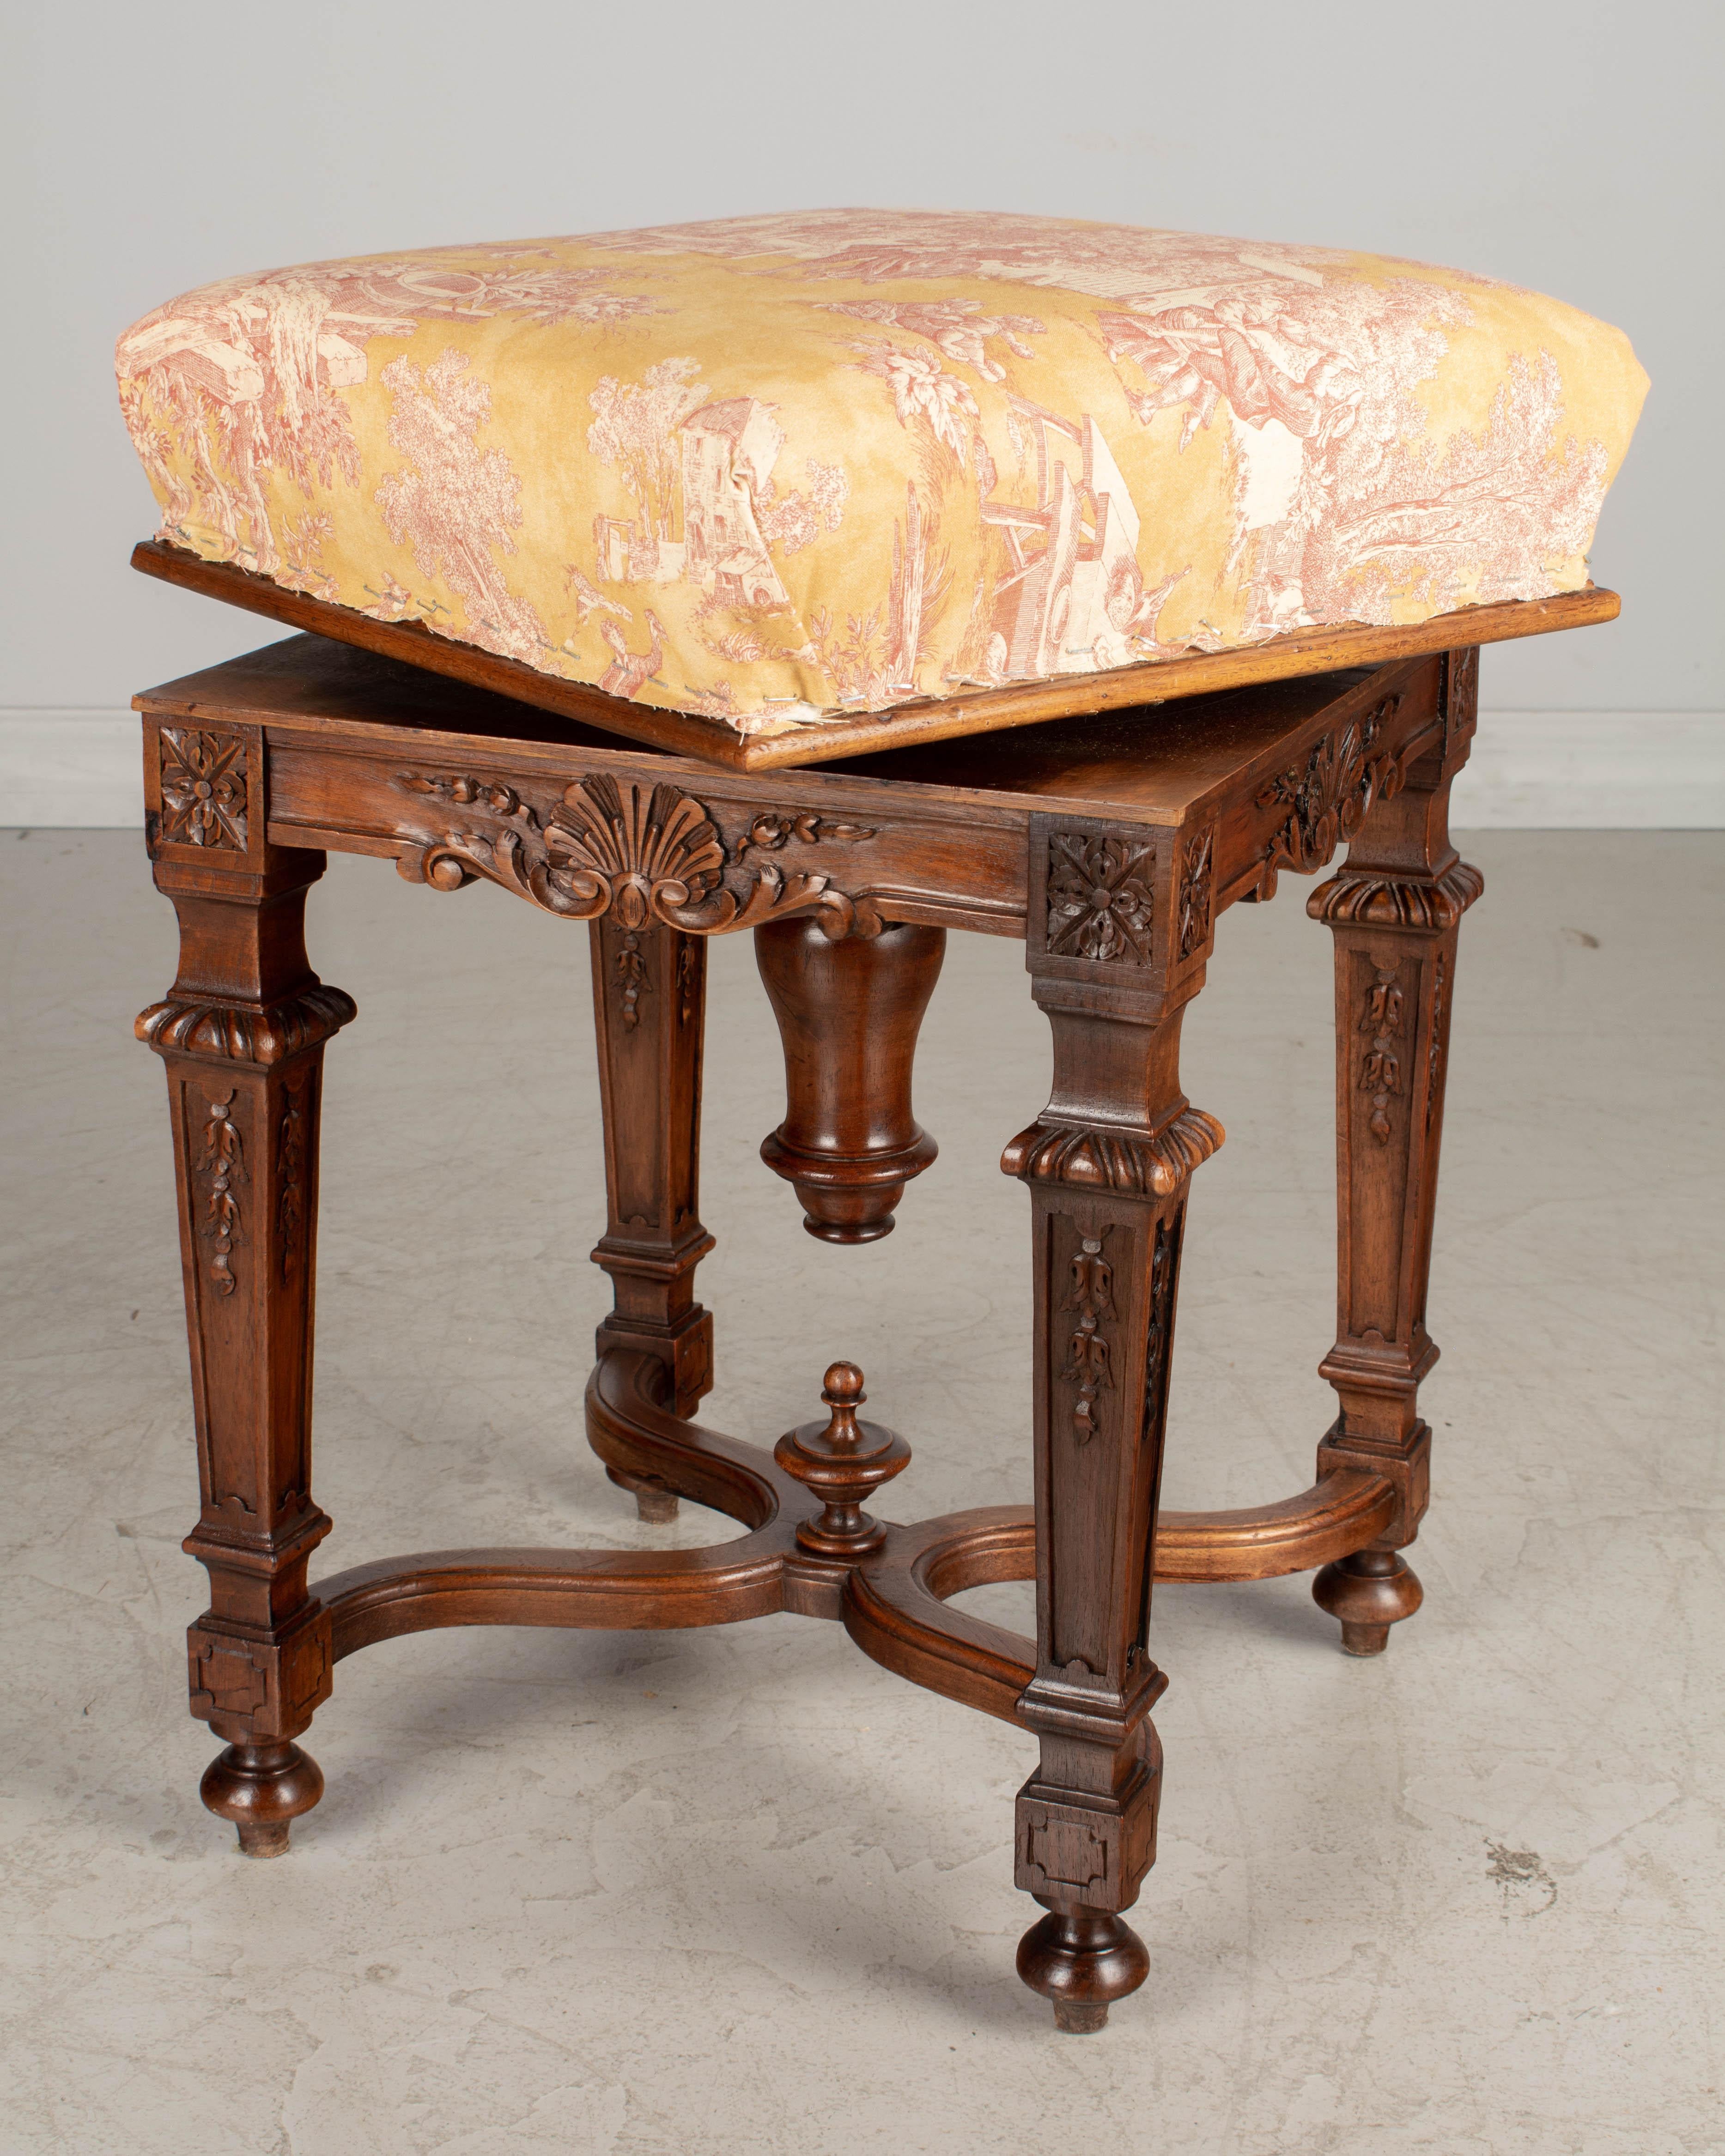 A 19th century French Louis XVI style adjustable swivel stool made of solid hand carved walnut with x-stretcher and wood finials. The seat of this small stool may be easily adjusted to a height of 21.5-26